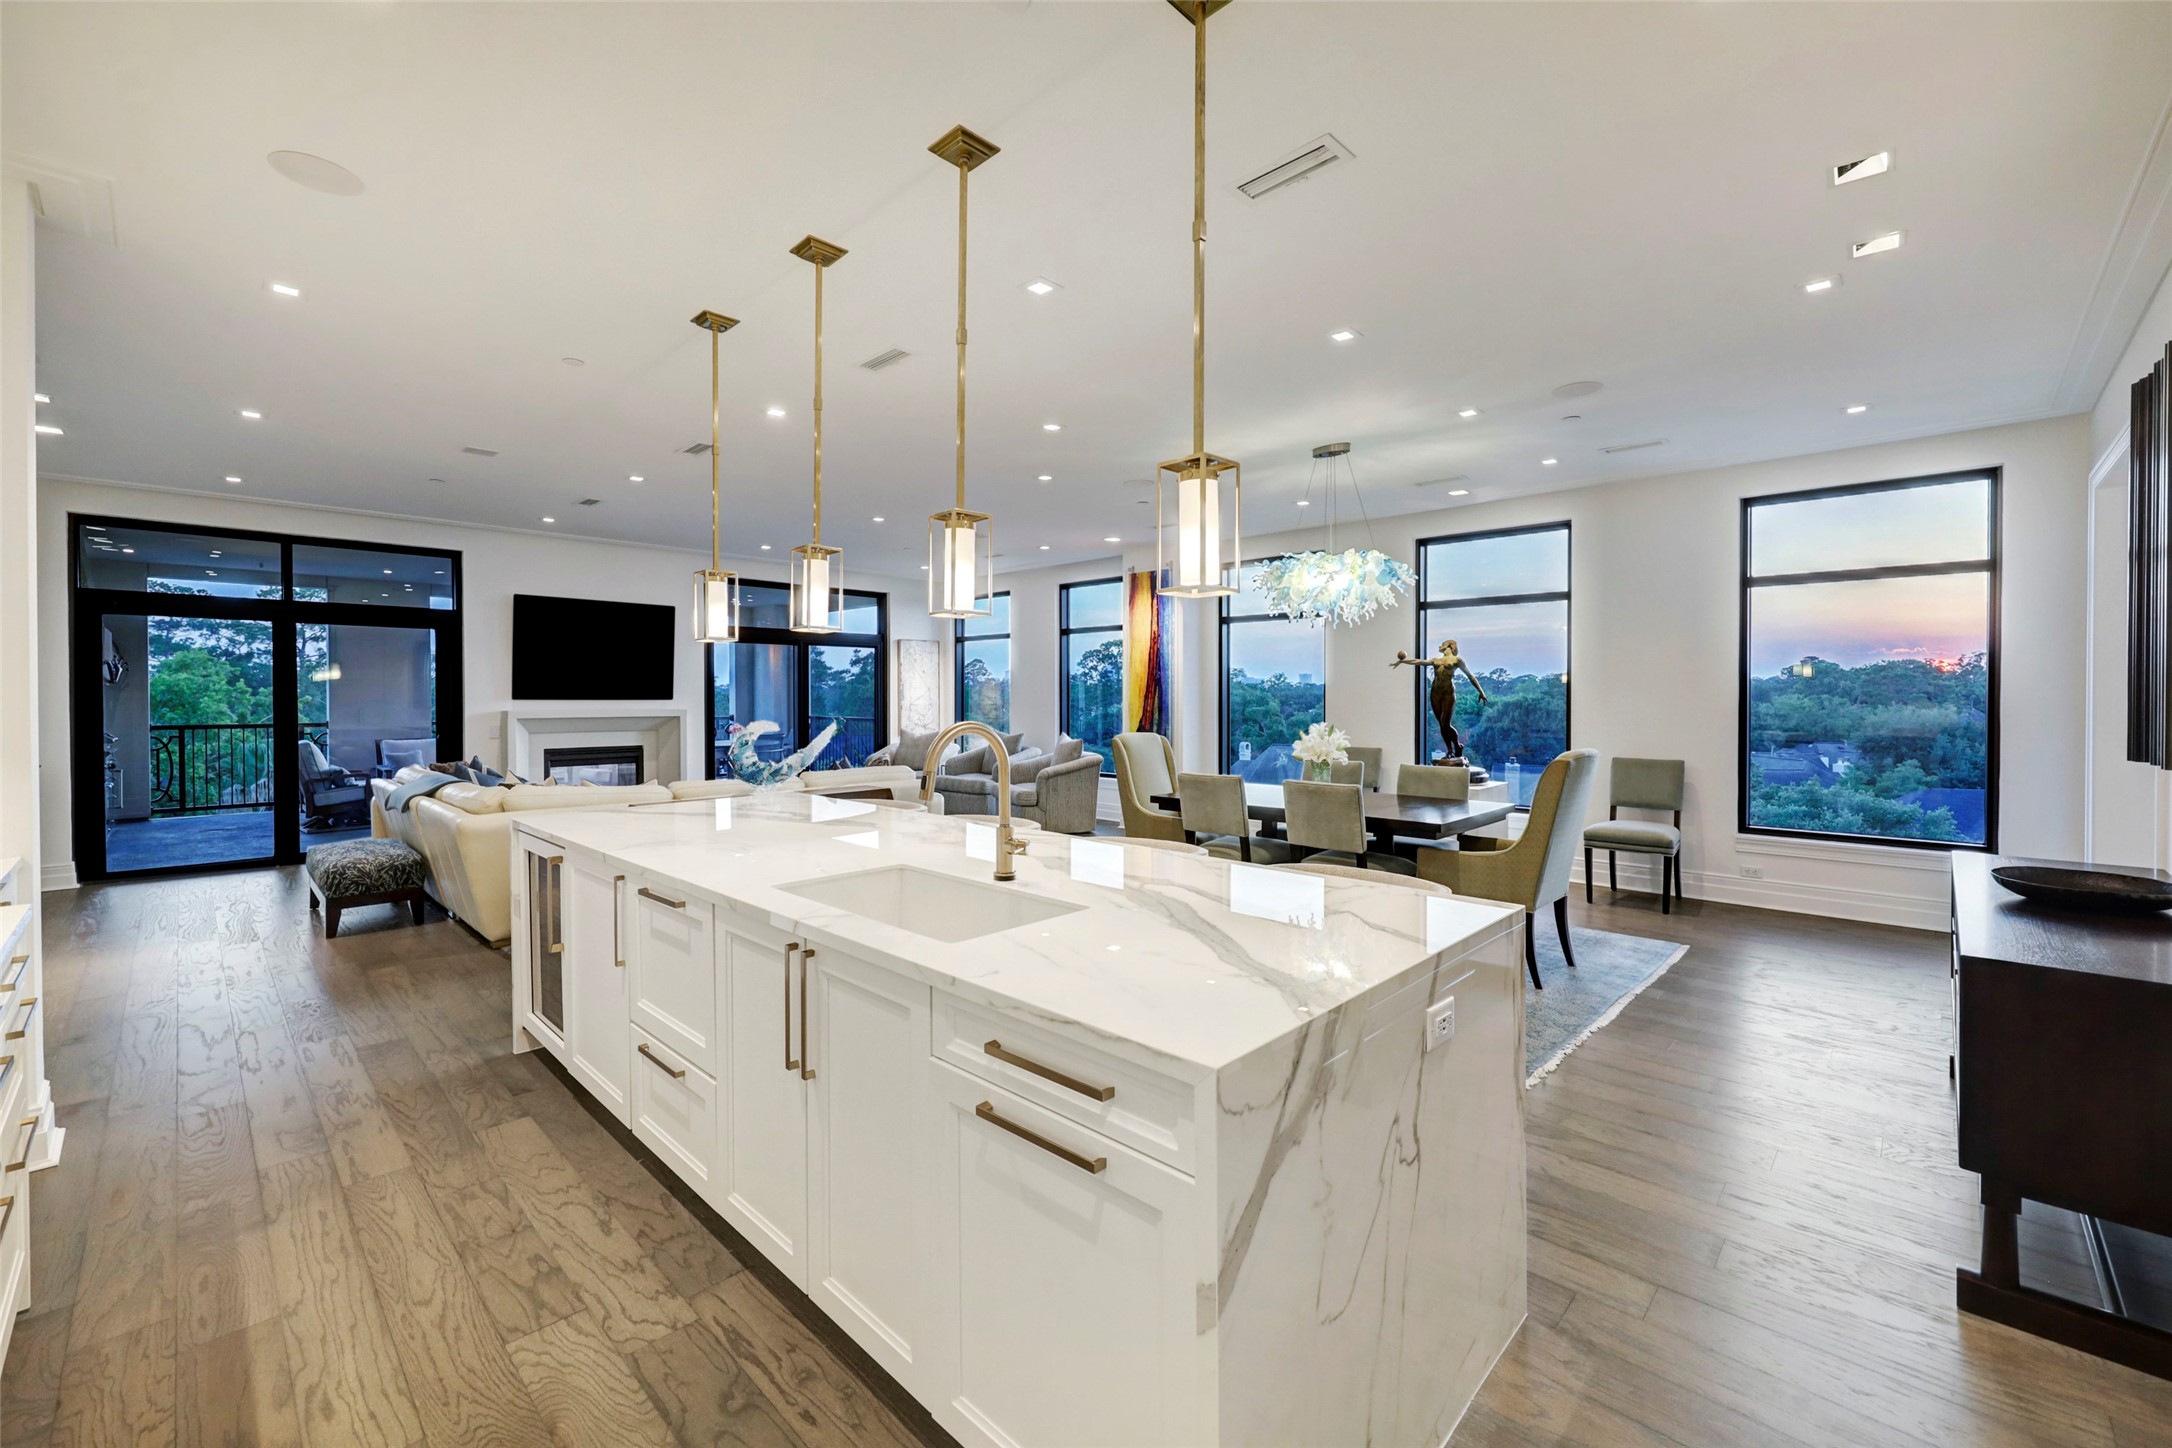 The Island highlights include a Fisher + Paykel double drawer Dishwasher, SubZero Beverage Center, and oversized single compartment Sink.  At the end of the Island is a large trash drawer.